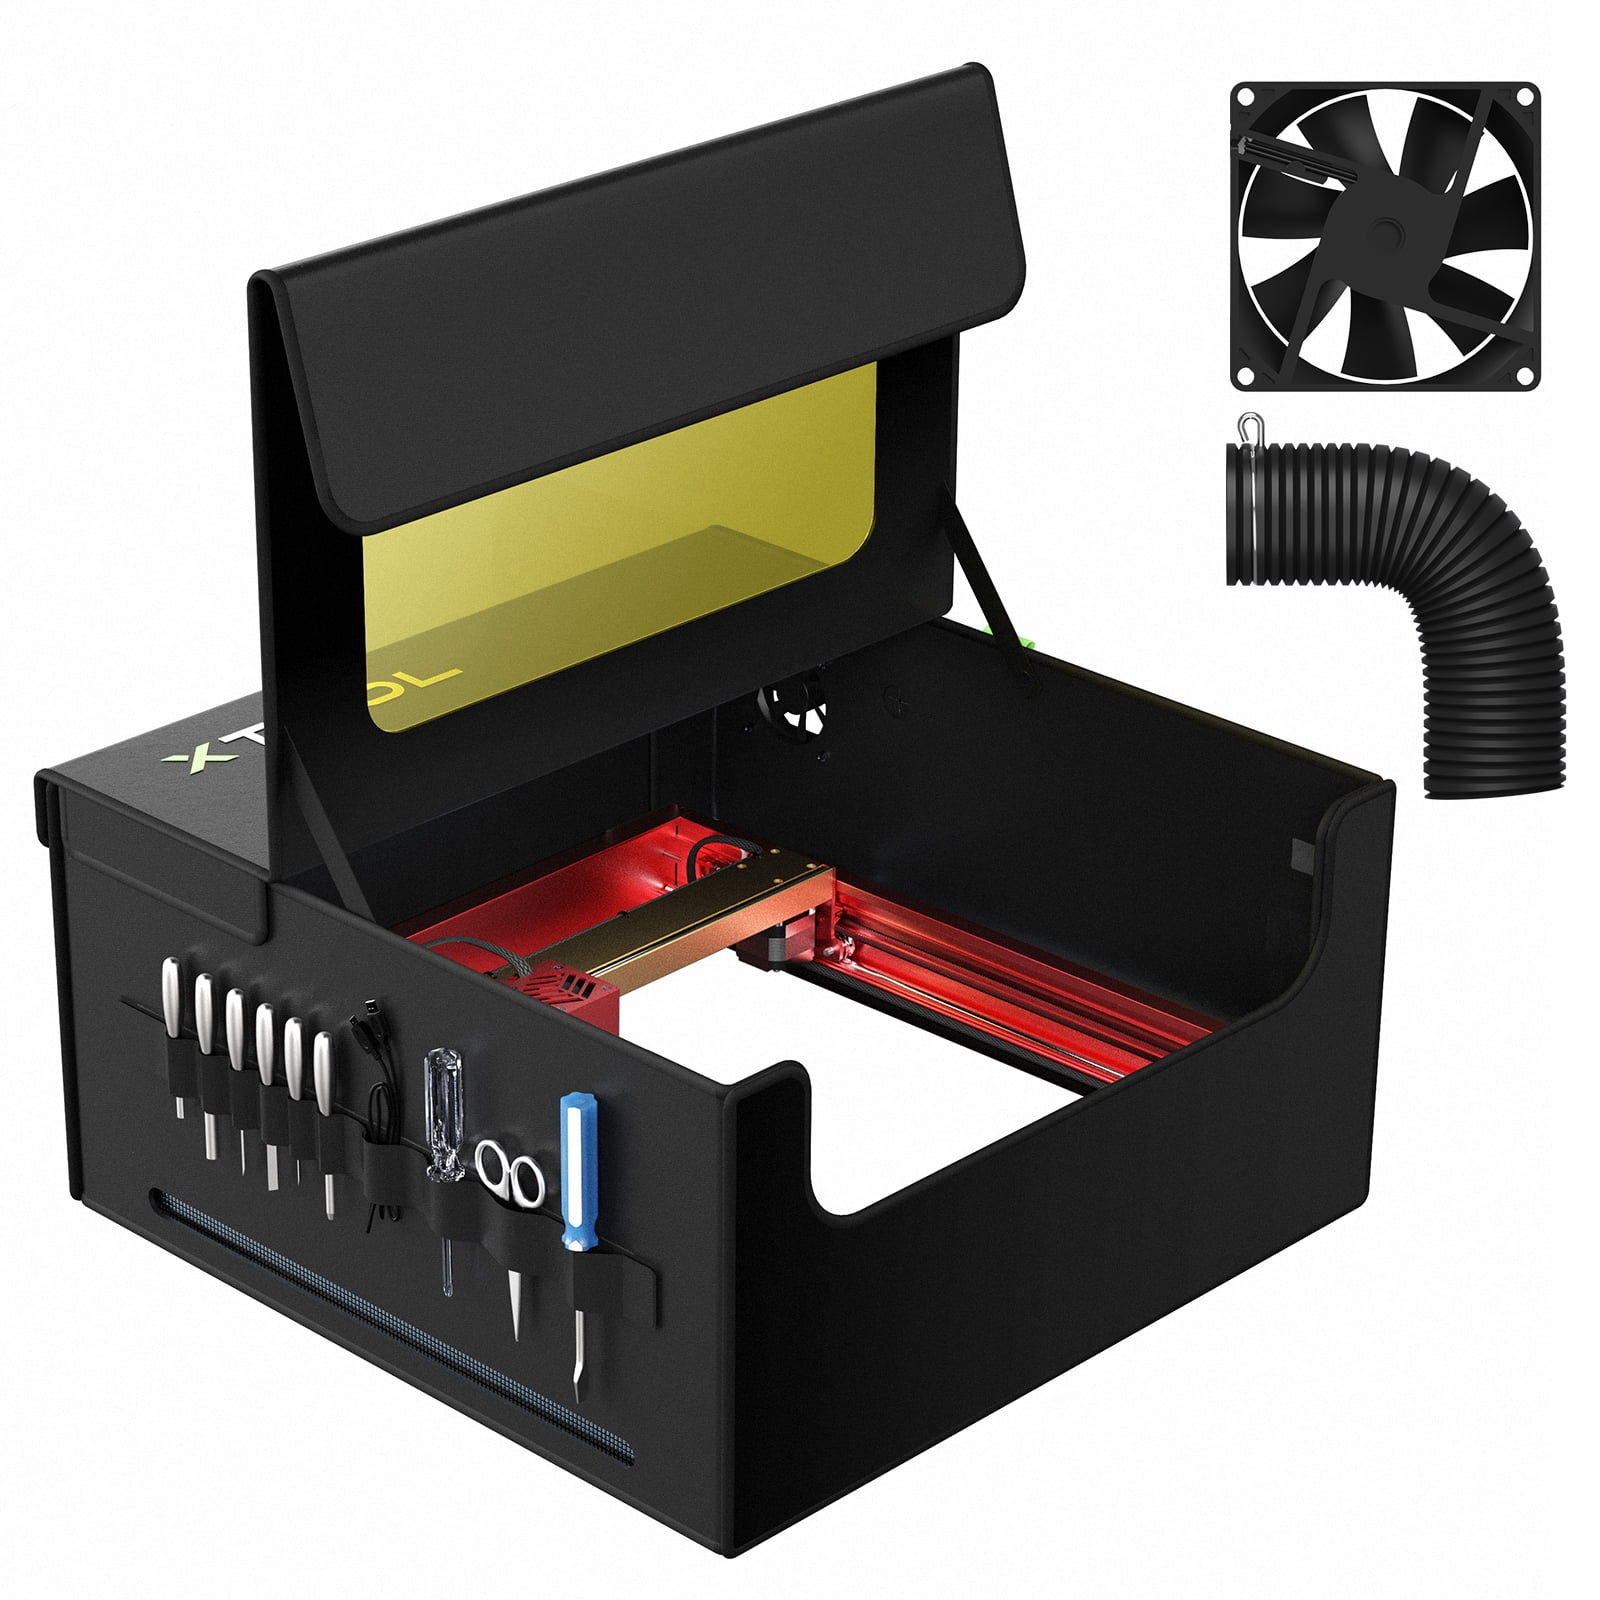 xTool Enclosure: foldable and smoke-proof cover for D1/D1 Pro and